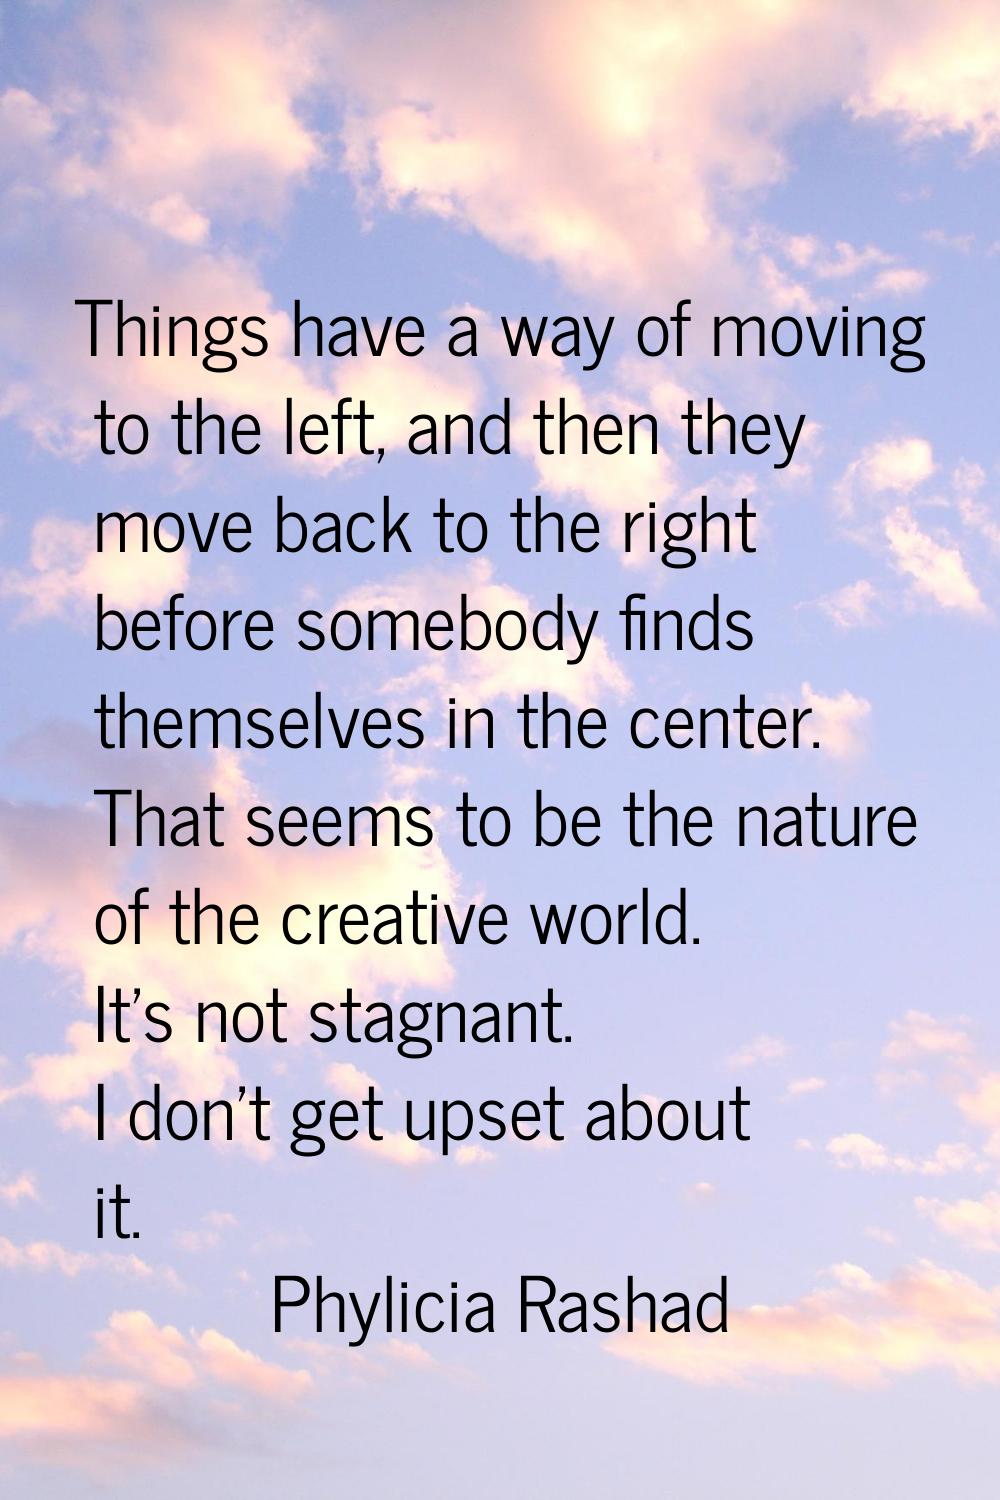 Things have a way of moving to the left, and then they move back to the right before somebody finds